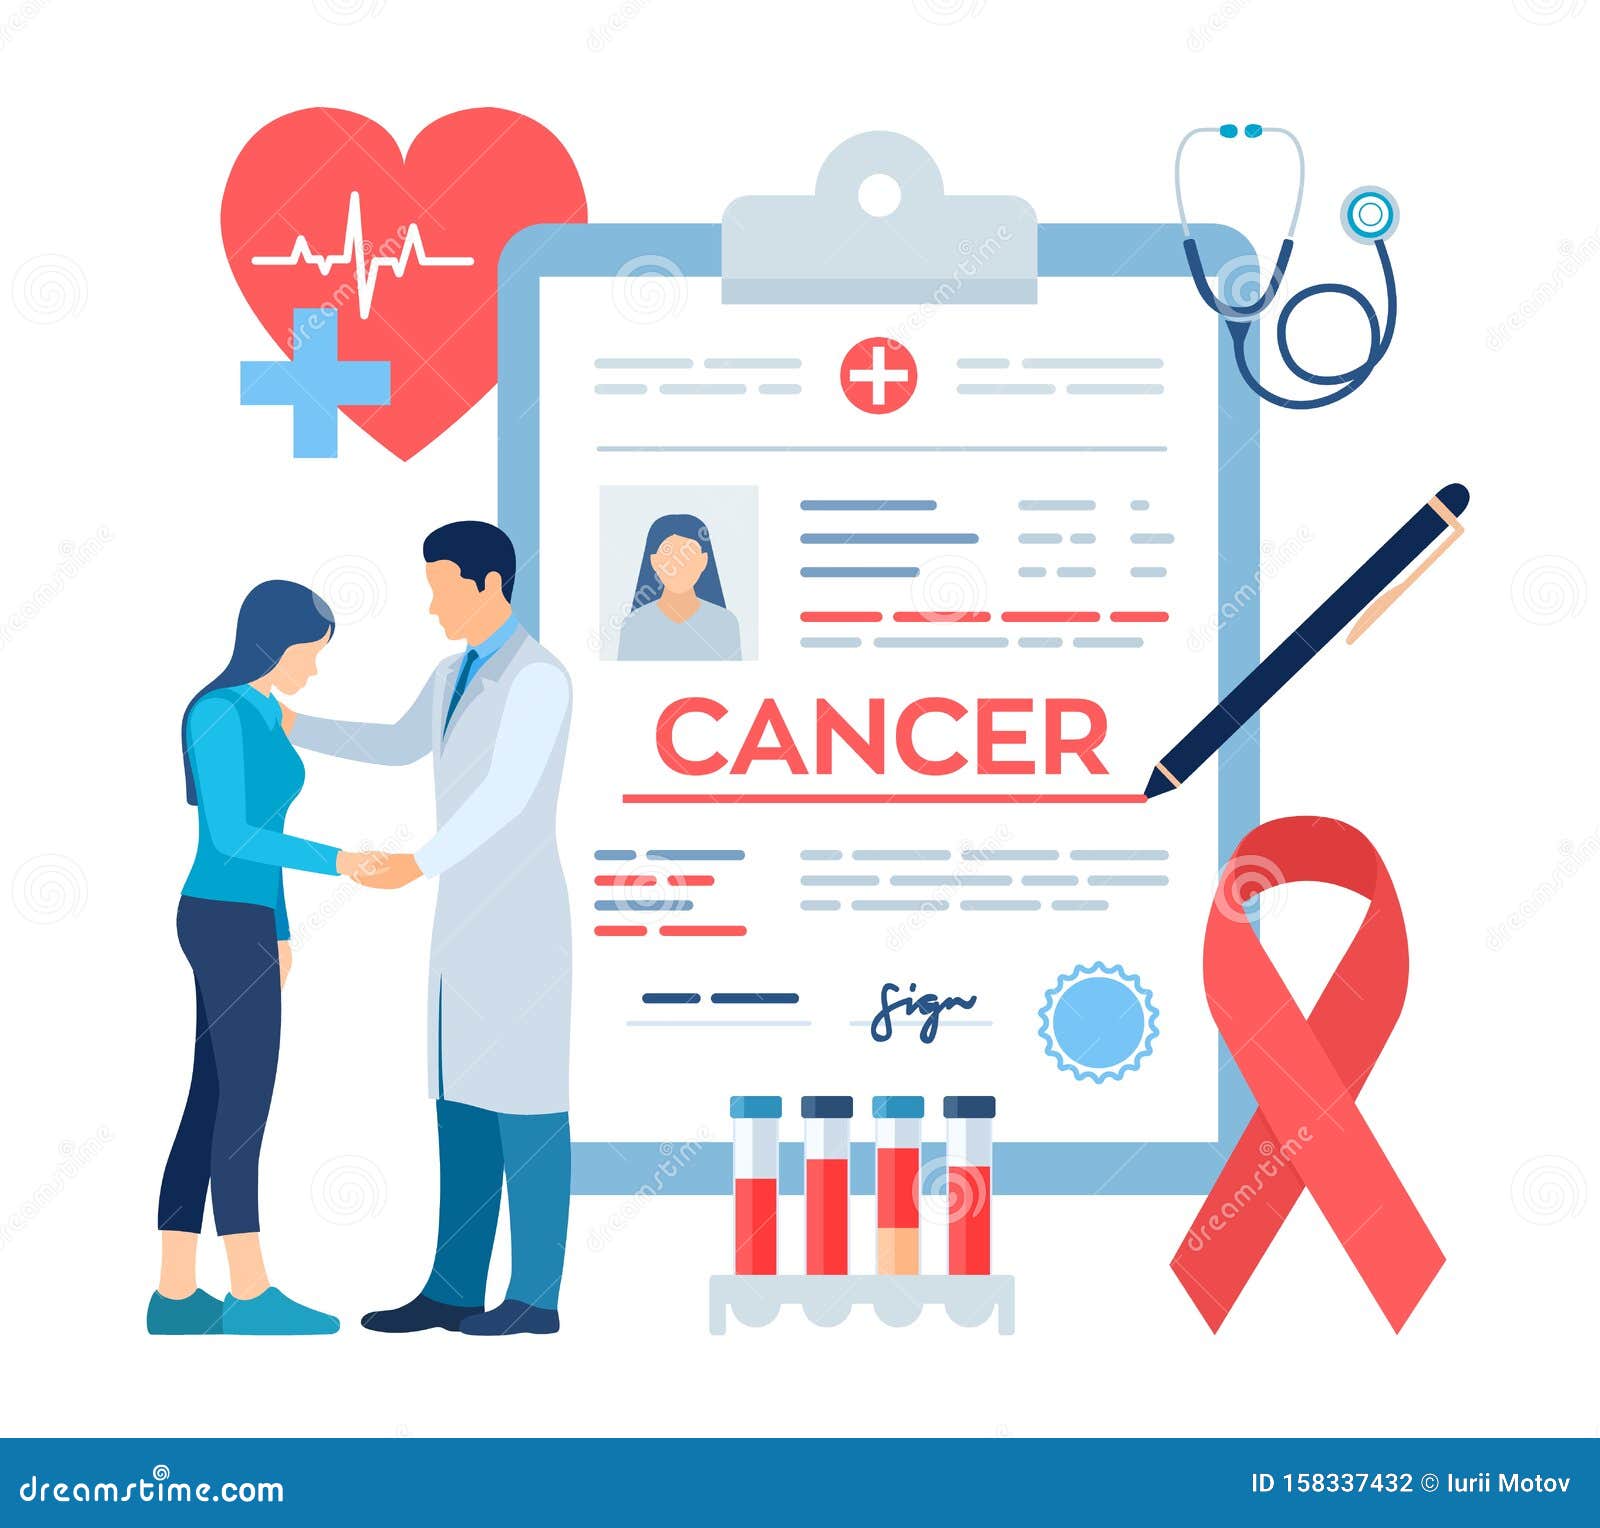 medical diagnosis - cancer. doctor taking care of patient. detecting and diagnosis of oncological disease. cancerous malignant